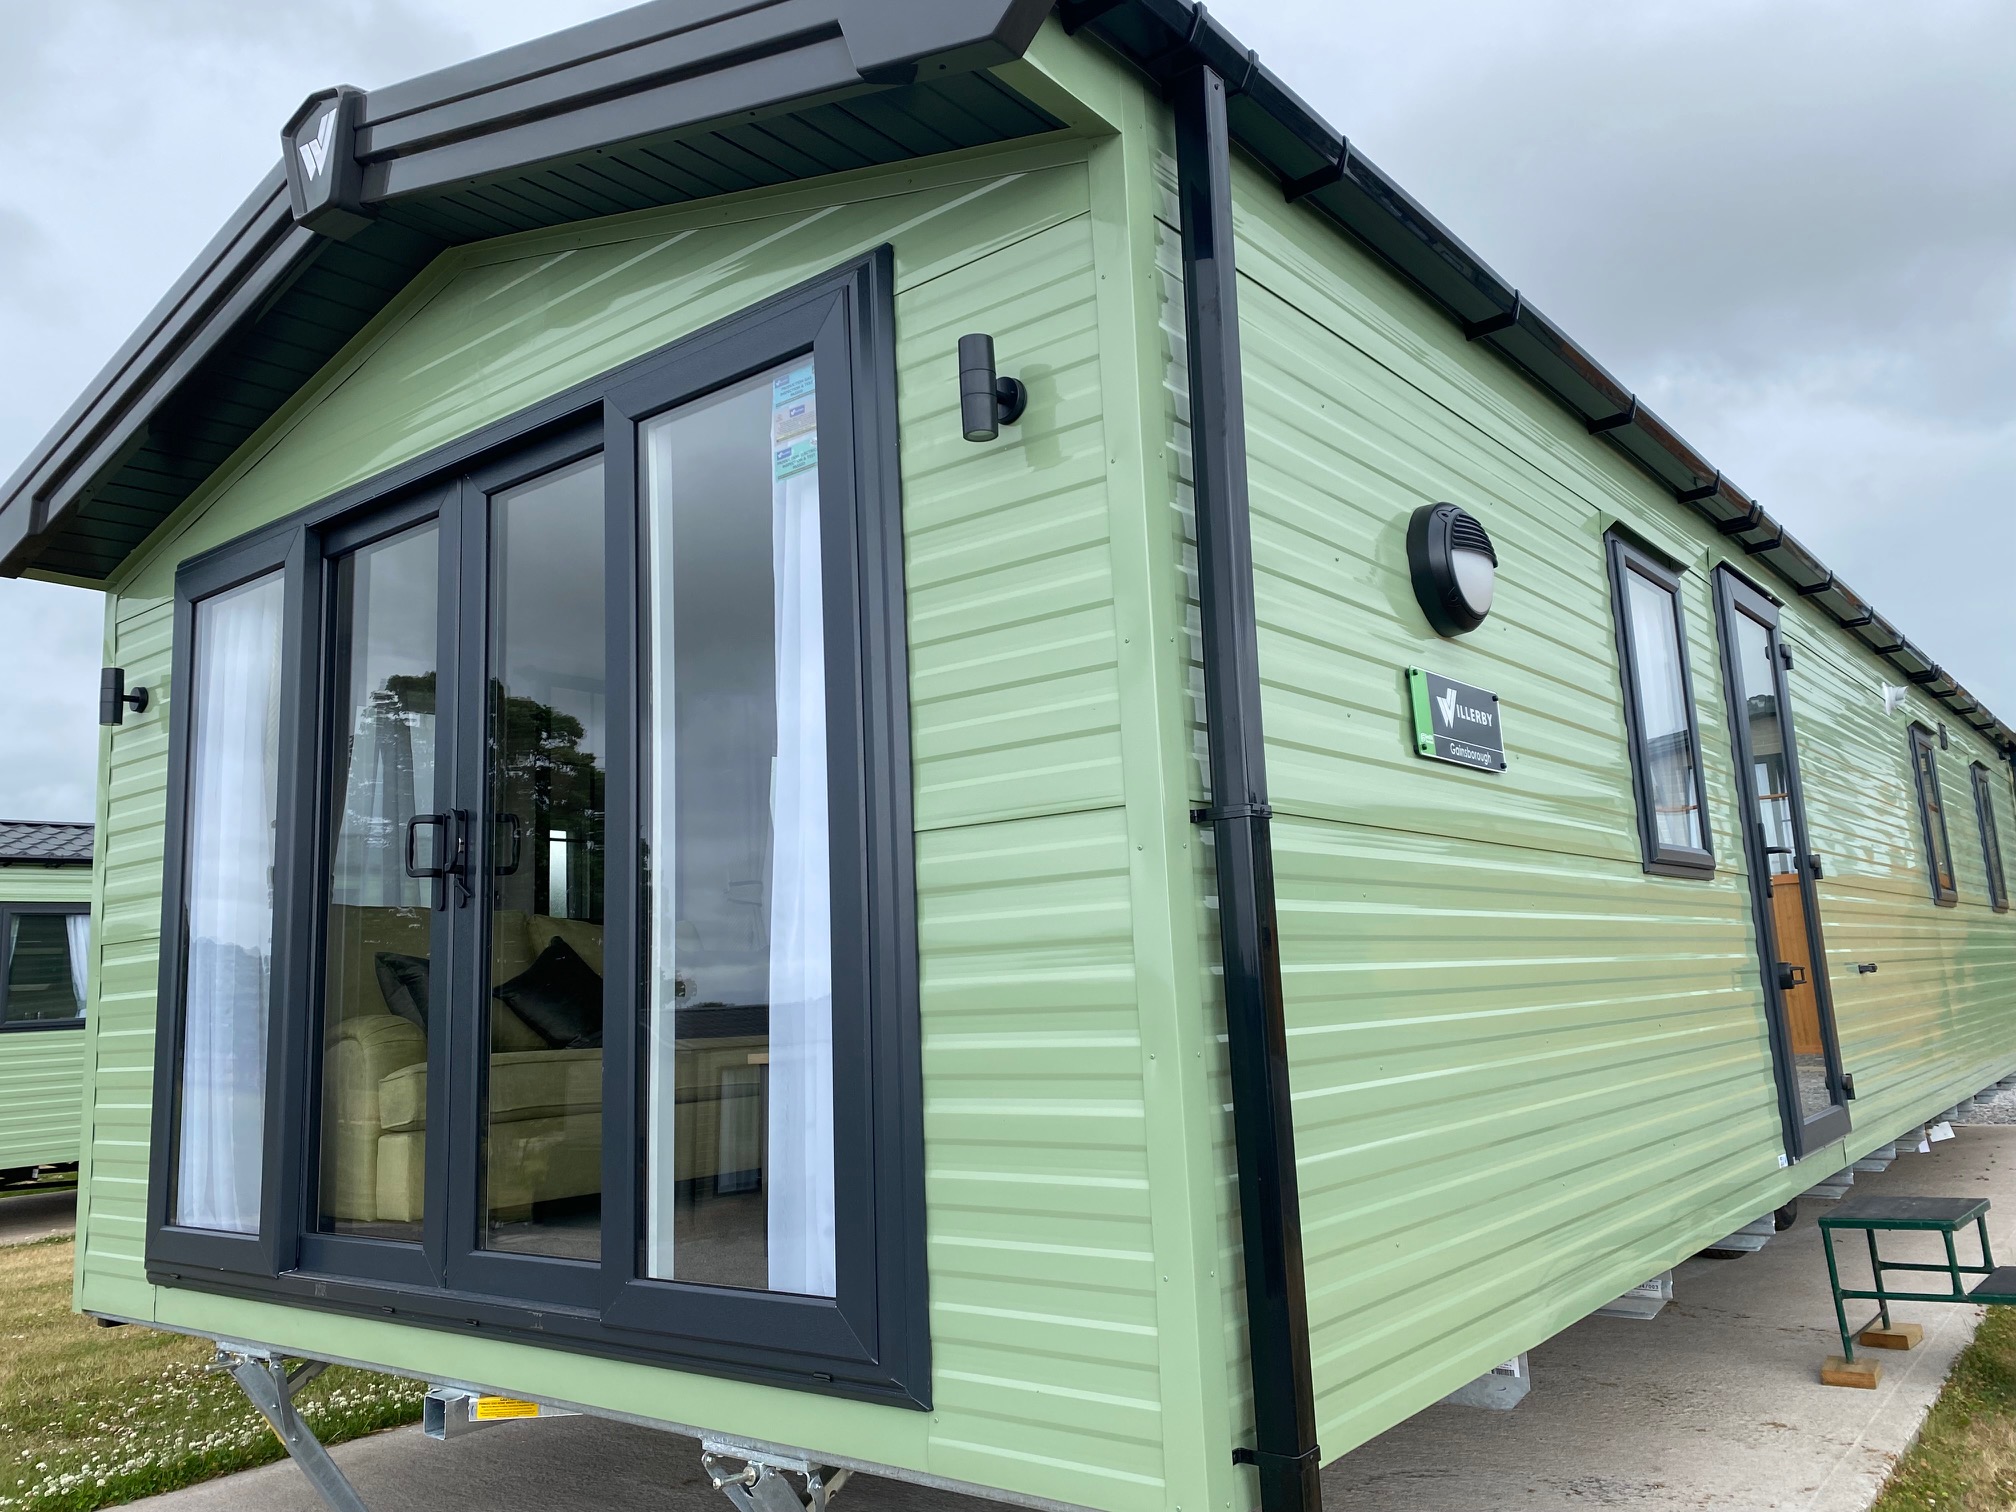 Willerby Gainsborough 38×12 2 Bed.